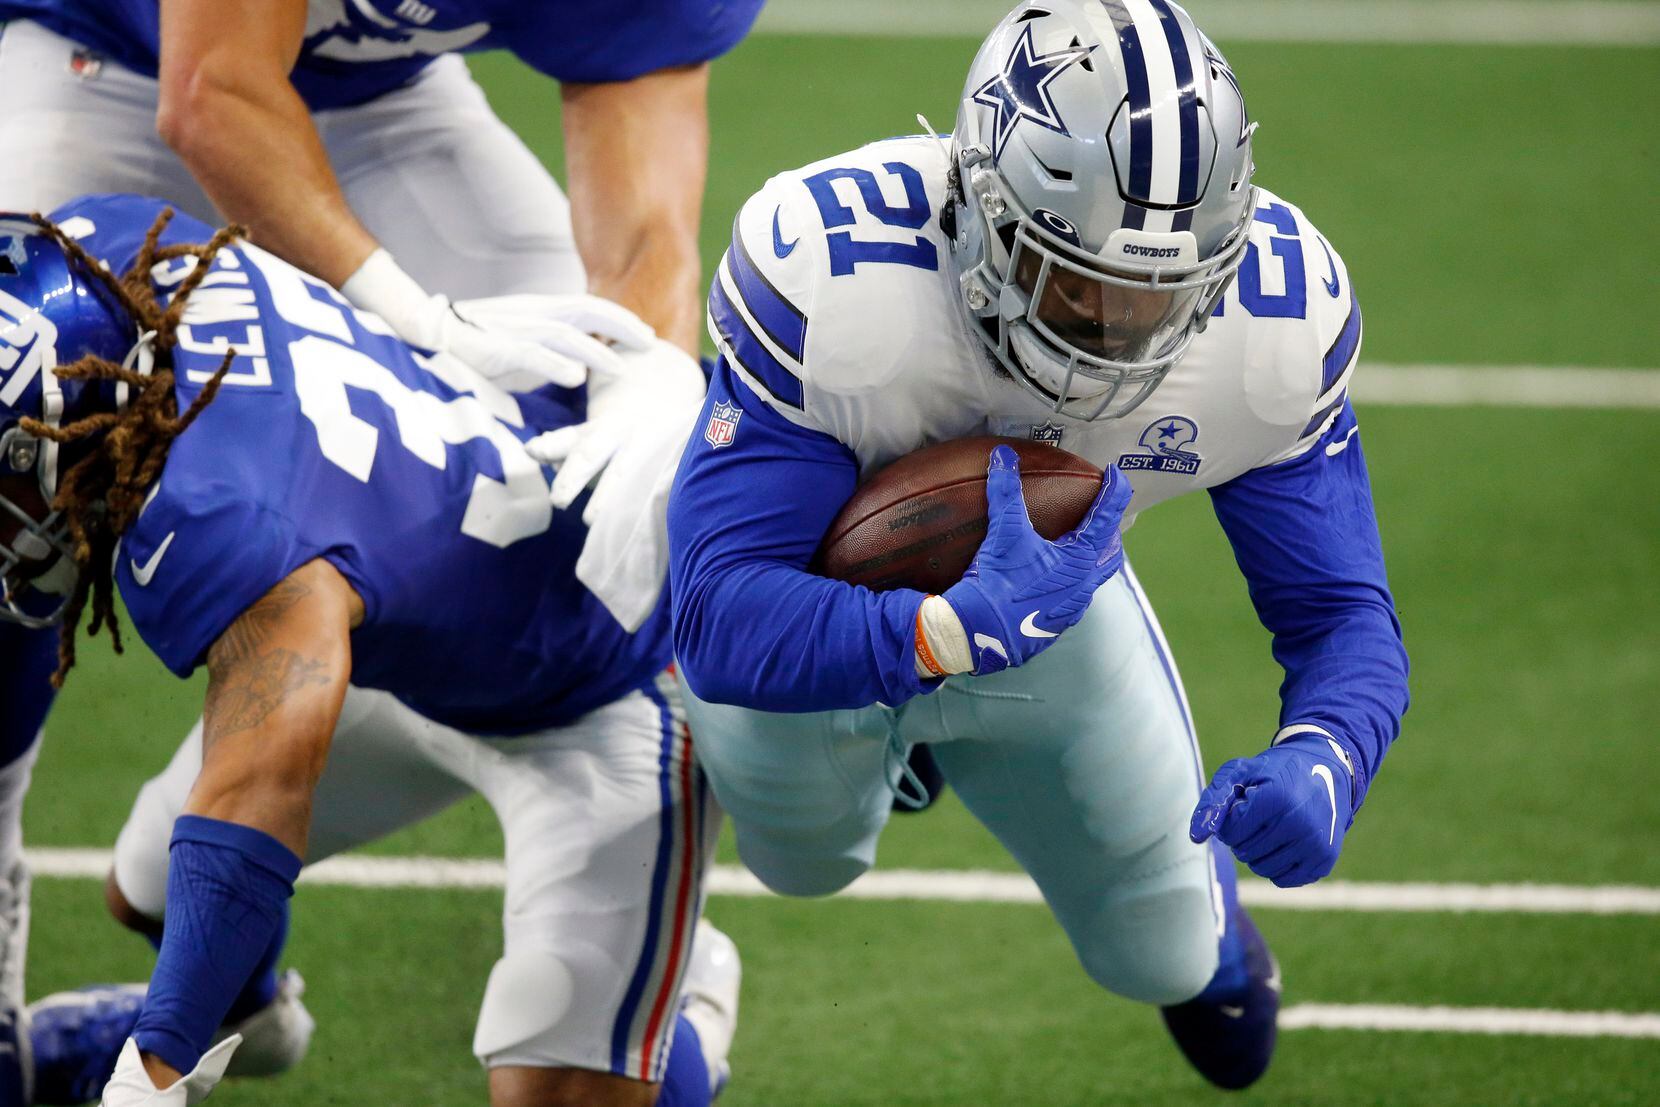 Dallas Cowboys running back Ezekiel Elliott (21) is hit by New York Giants running back Dion Lewis (33) after making a catch during the first quarter at AT&T Stadium Stadium in Arlington, Texas, Sunday, October 11, 2020. (Tom Fox/The Dallas Morning News)